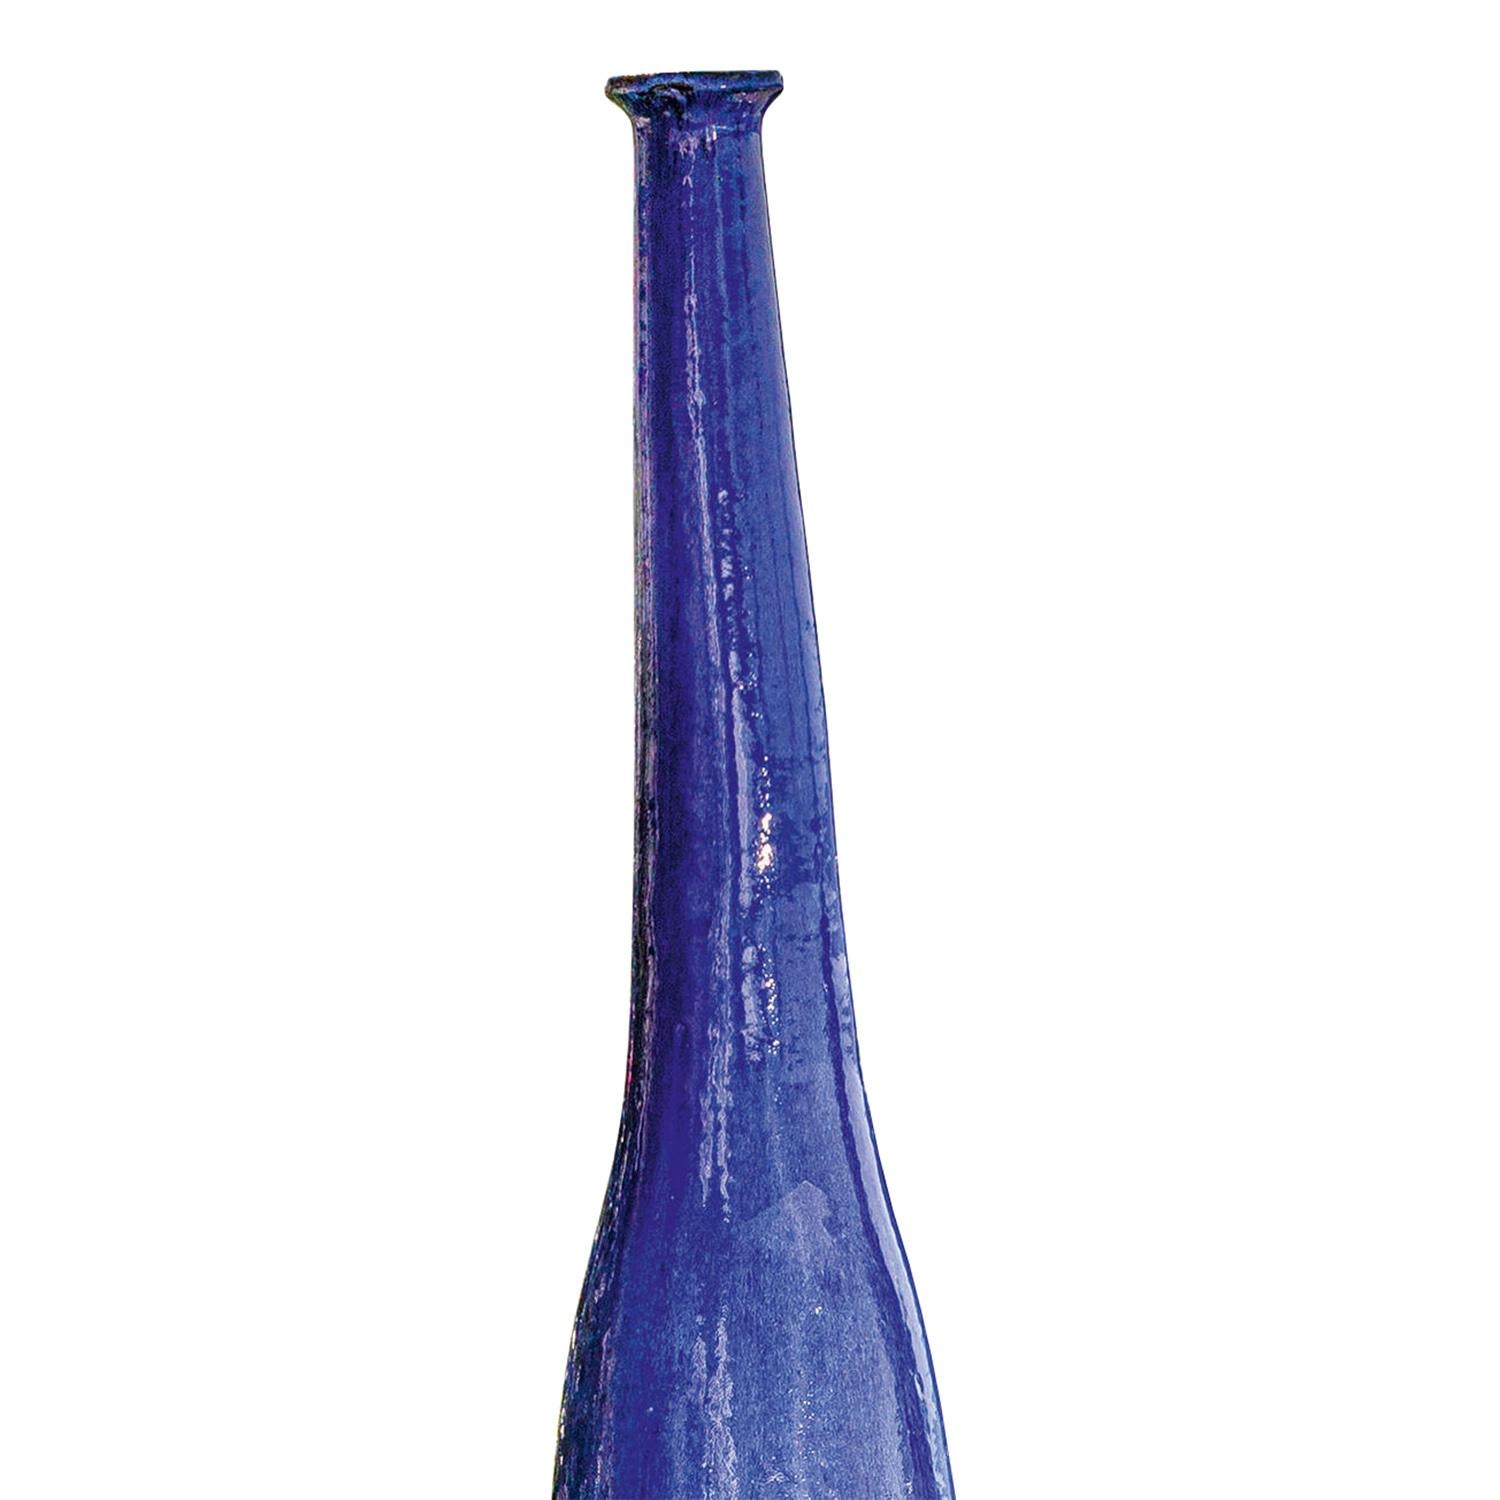 Vase Reed Blue Large all in ceramic
in blue finish. Each piece is unique due
to the ceramic production technical.